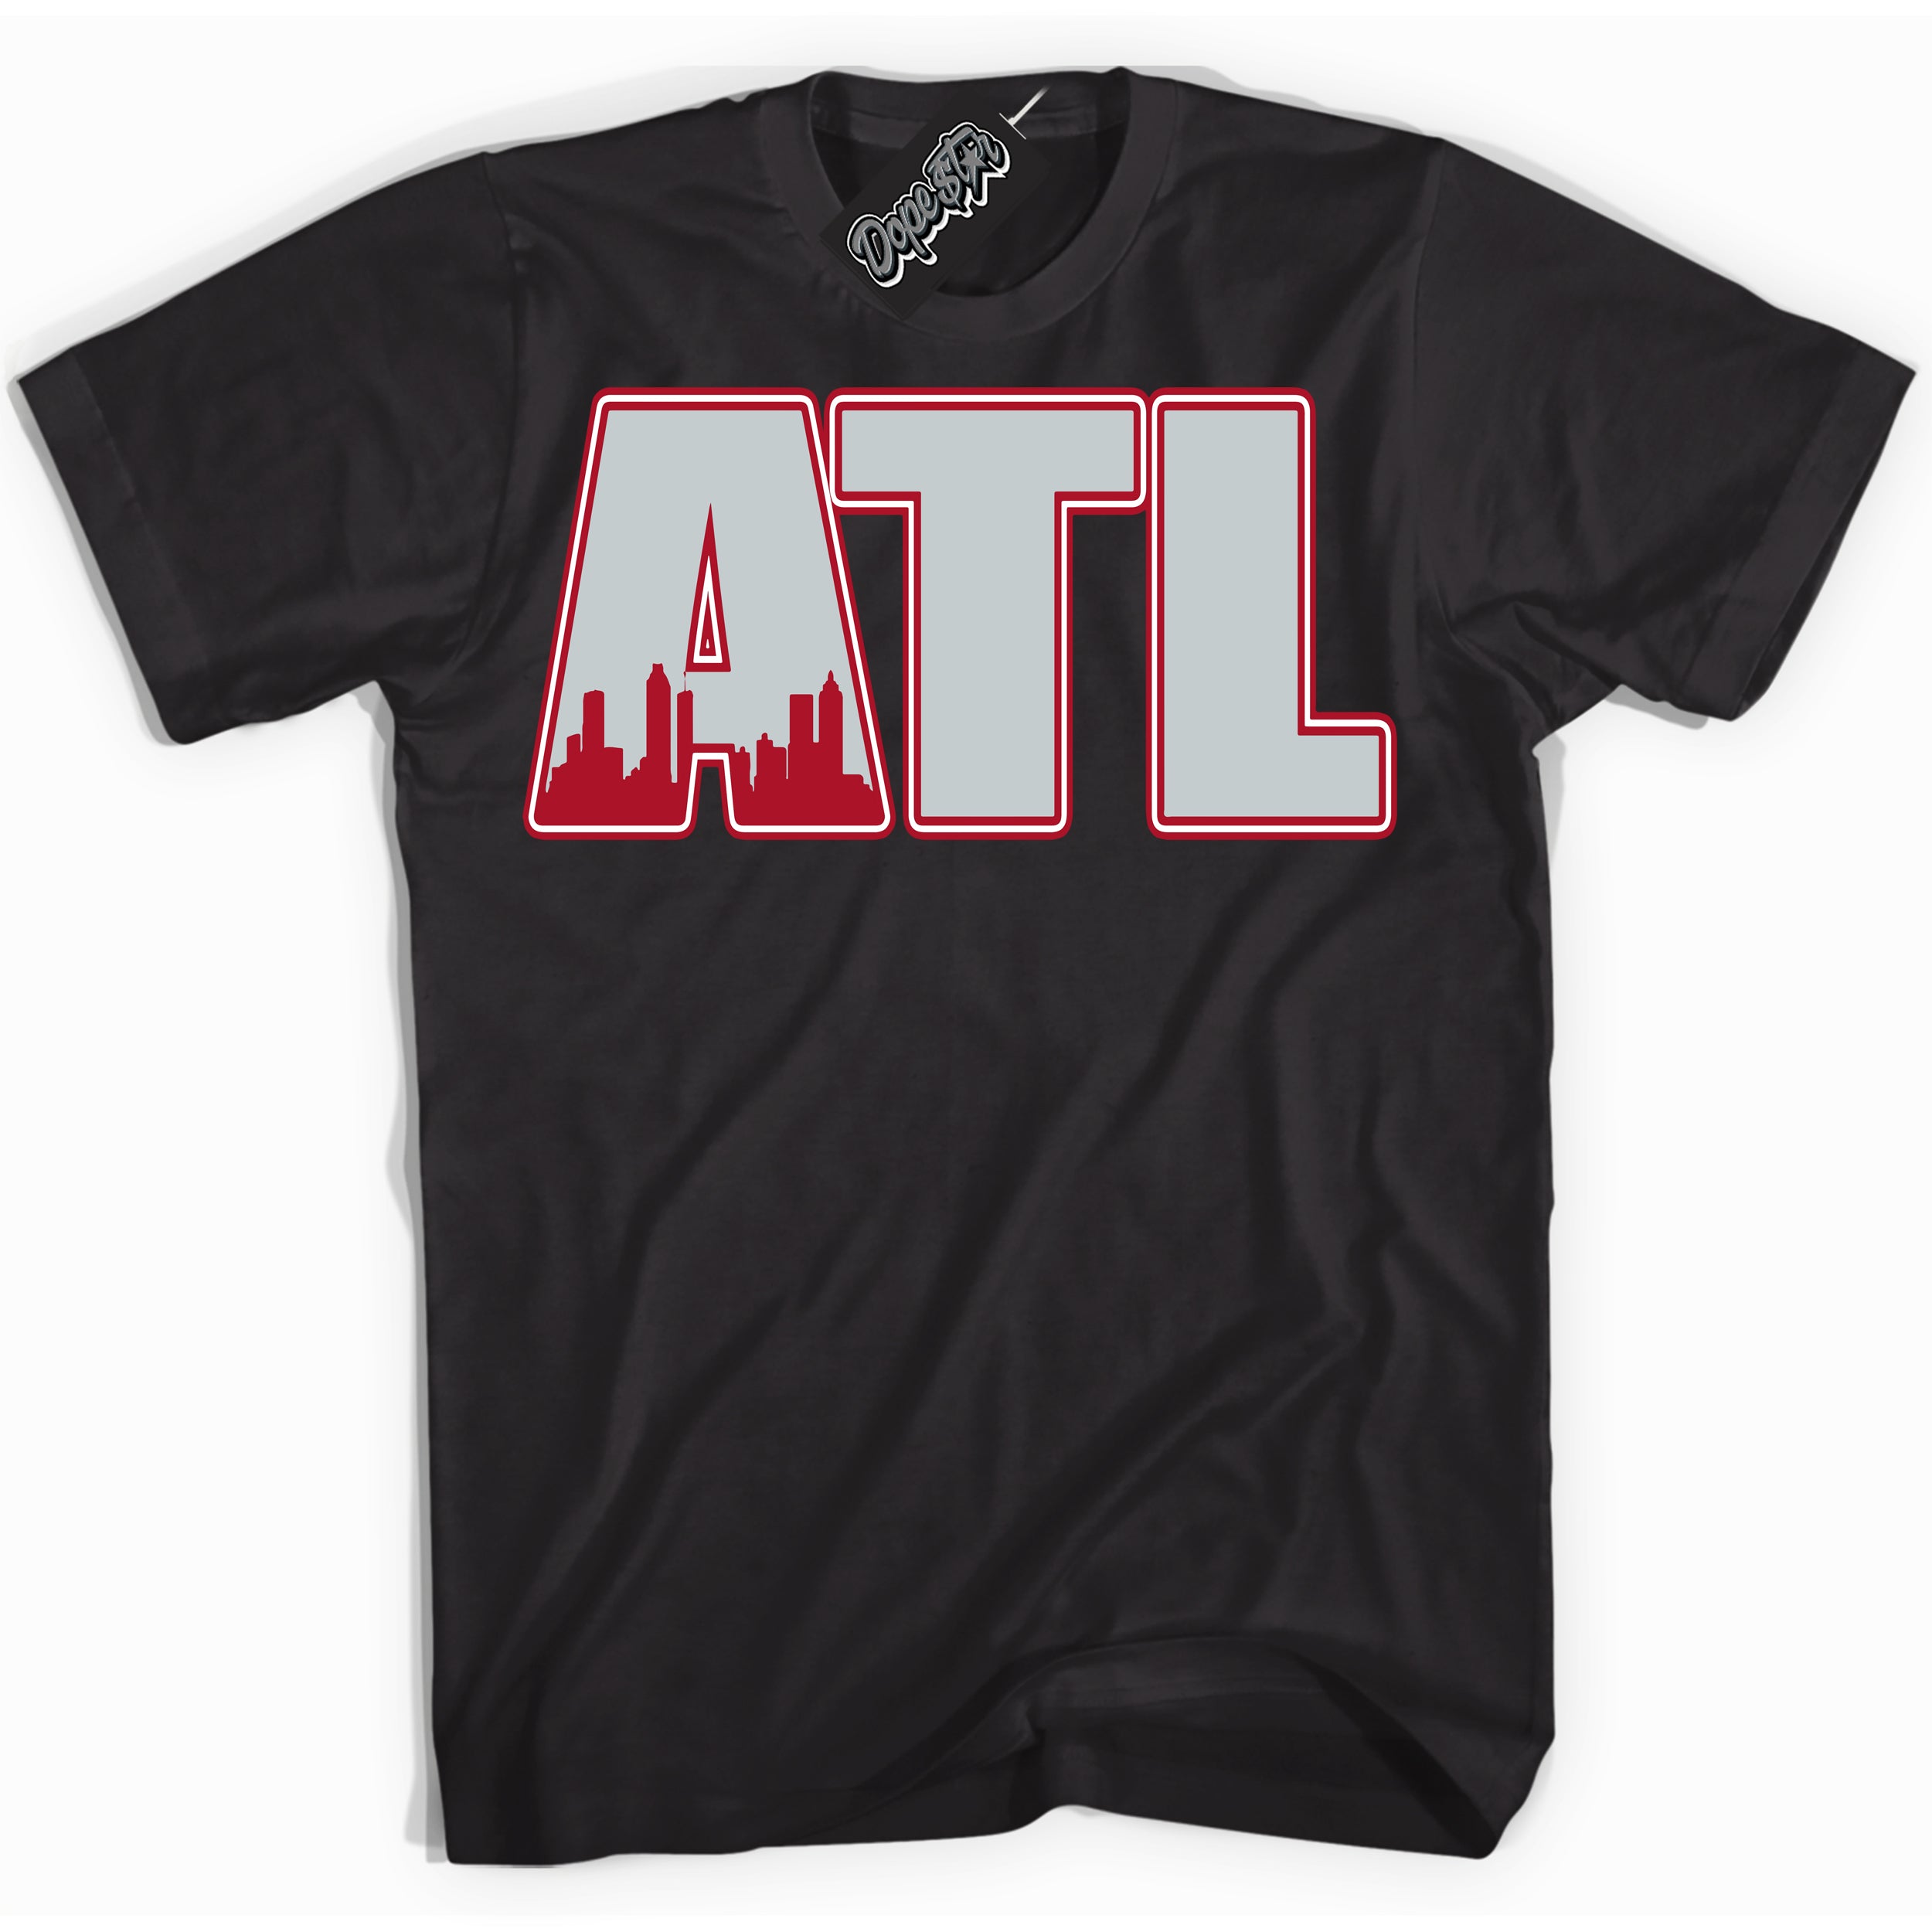 Cool Black Shirt with “ Atlanta” design that perfectly matches Reverse Ultraman Sneakers.